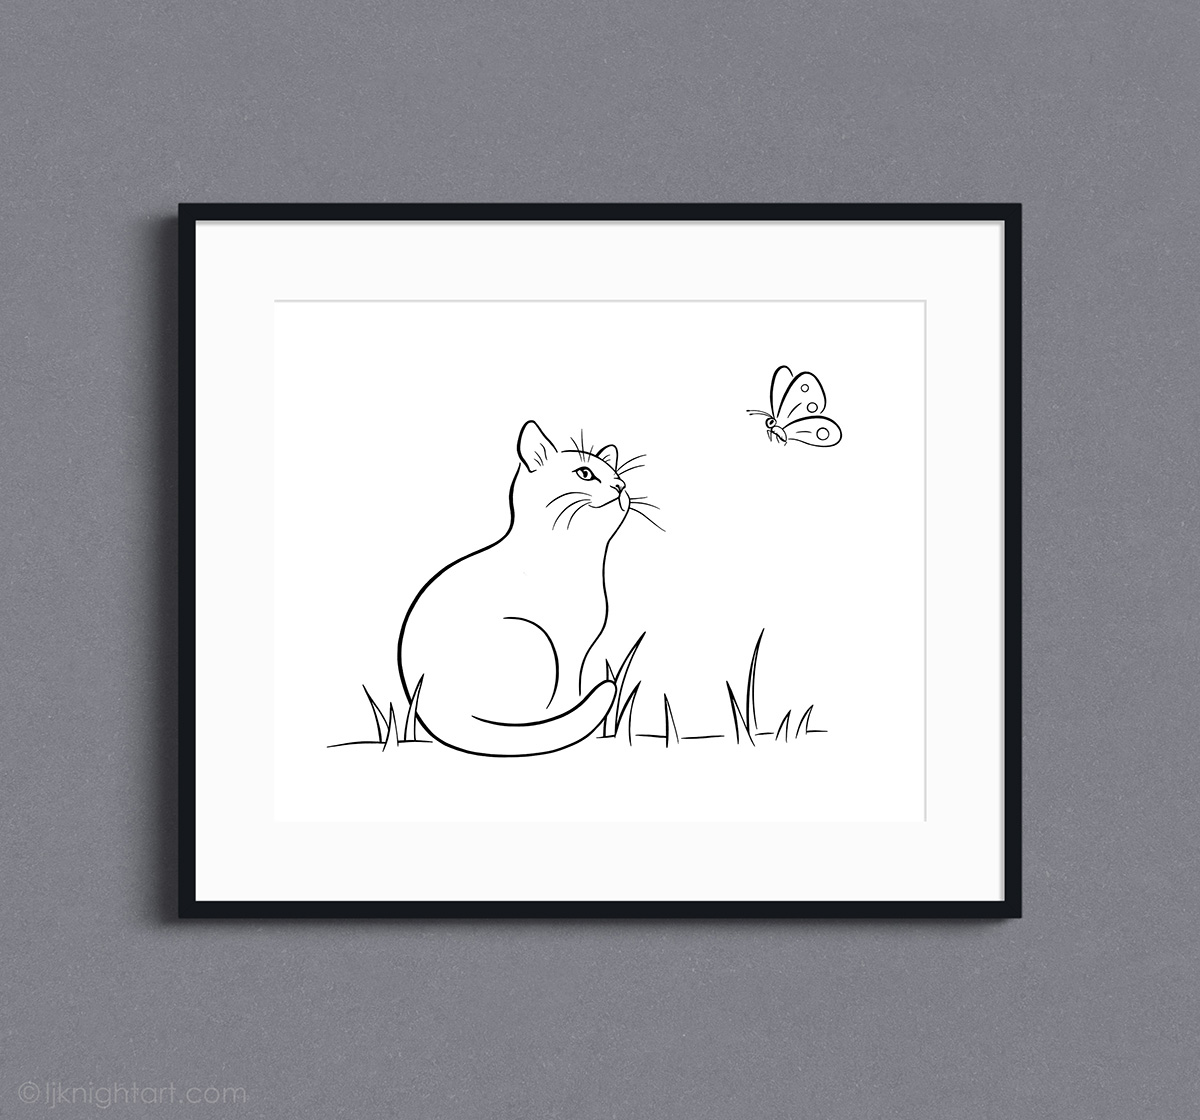 Curious Kitten Watching a Butterfly - modern minimalist animal drawing by L.J. Knight